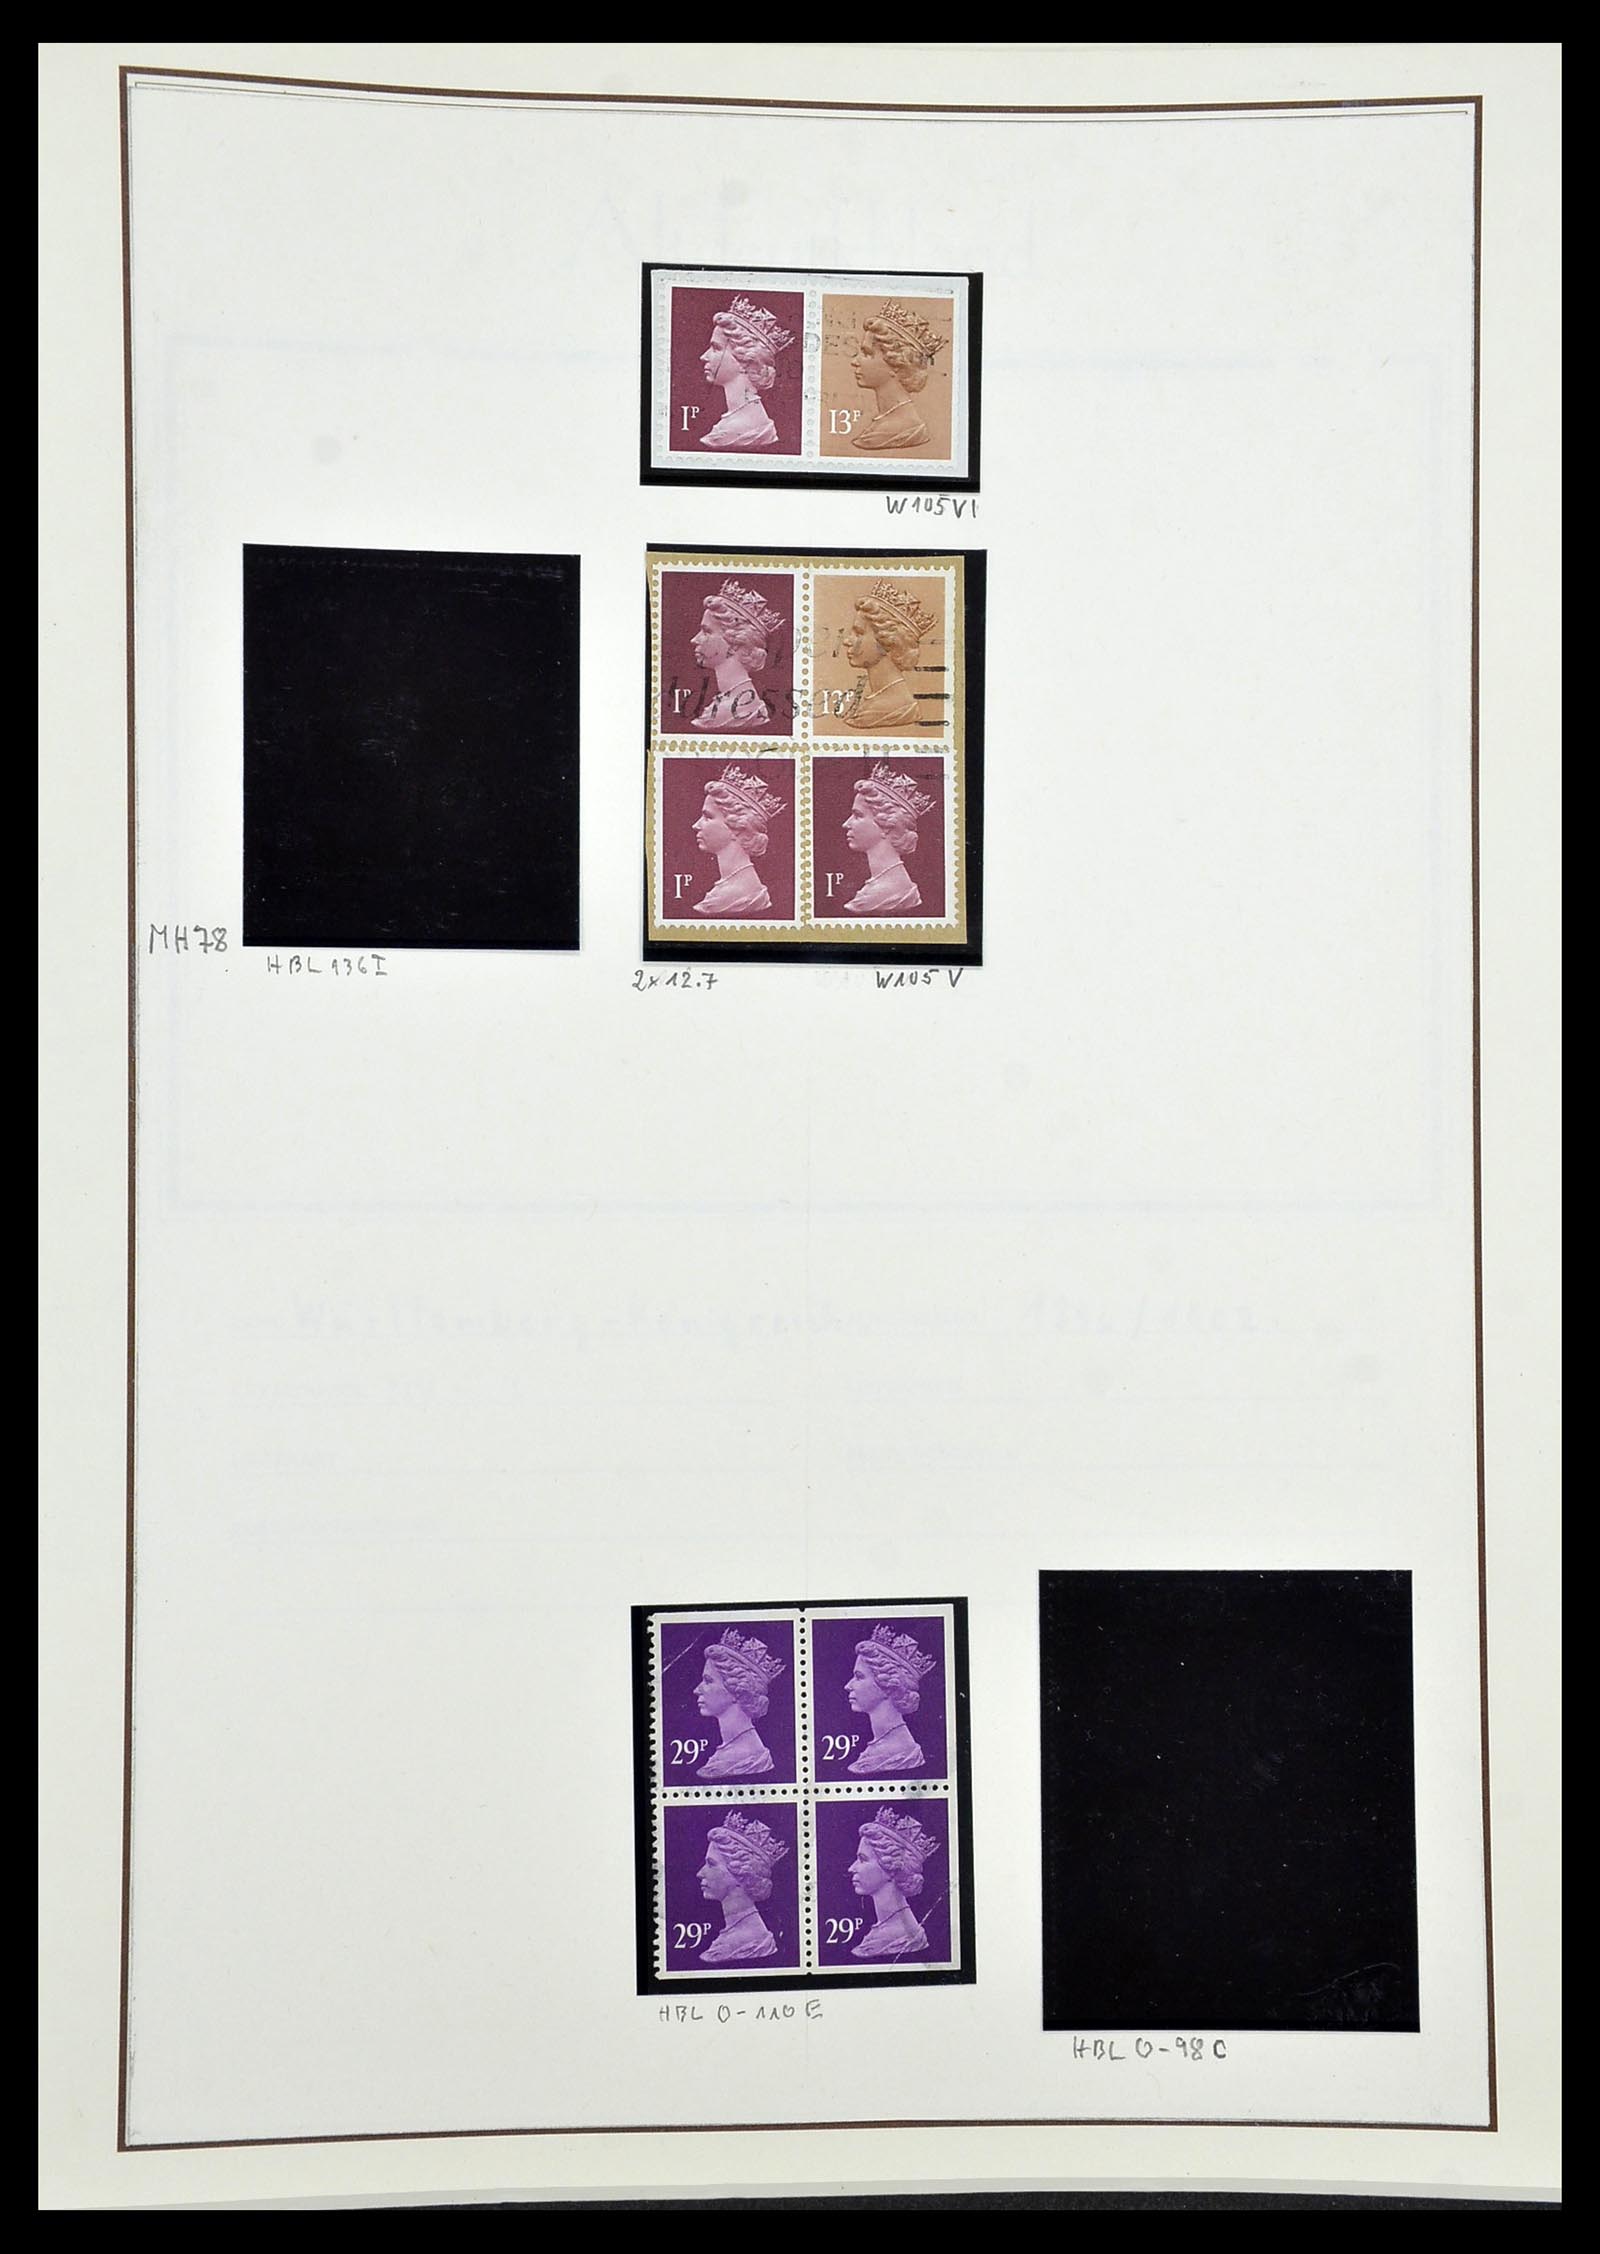 34221 205 - Stamp collection 34221 Great Britain Machins/castles 1971-2005.